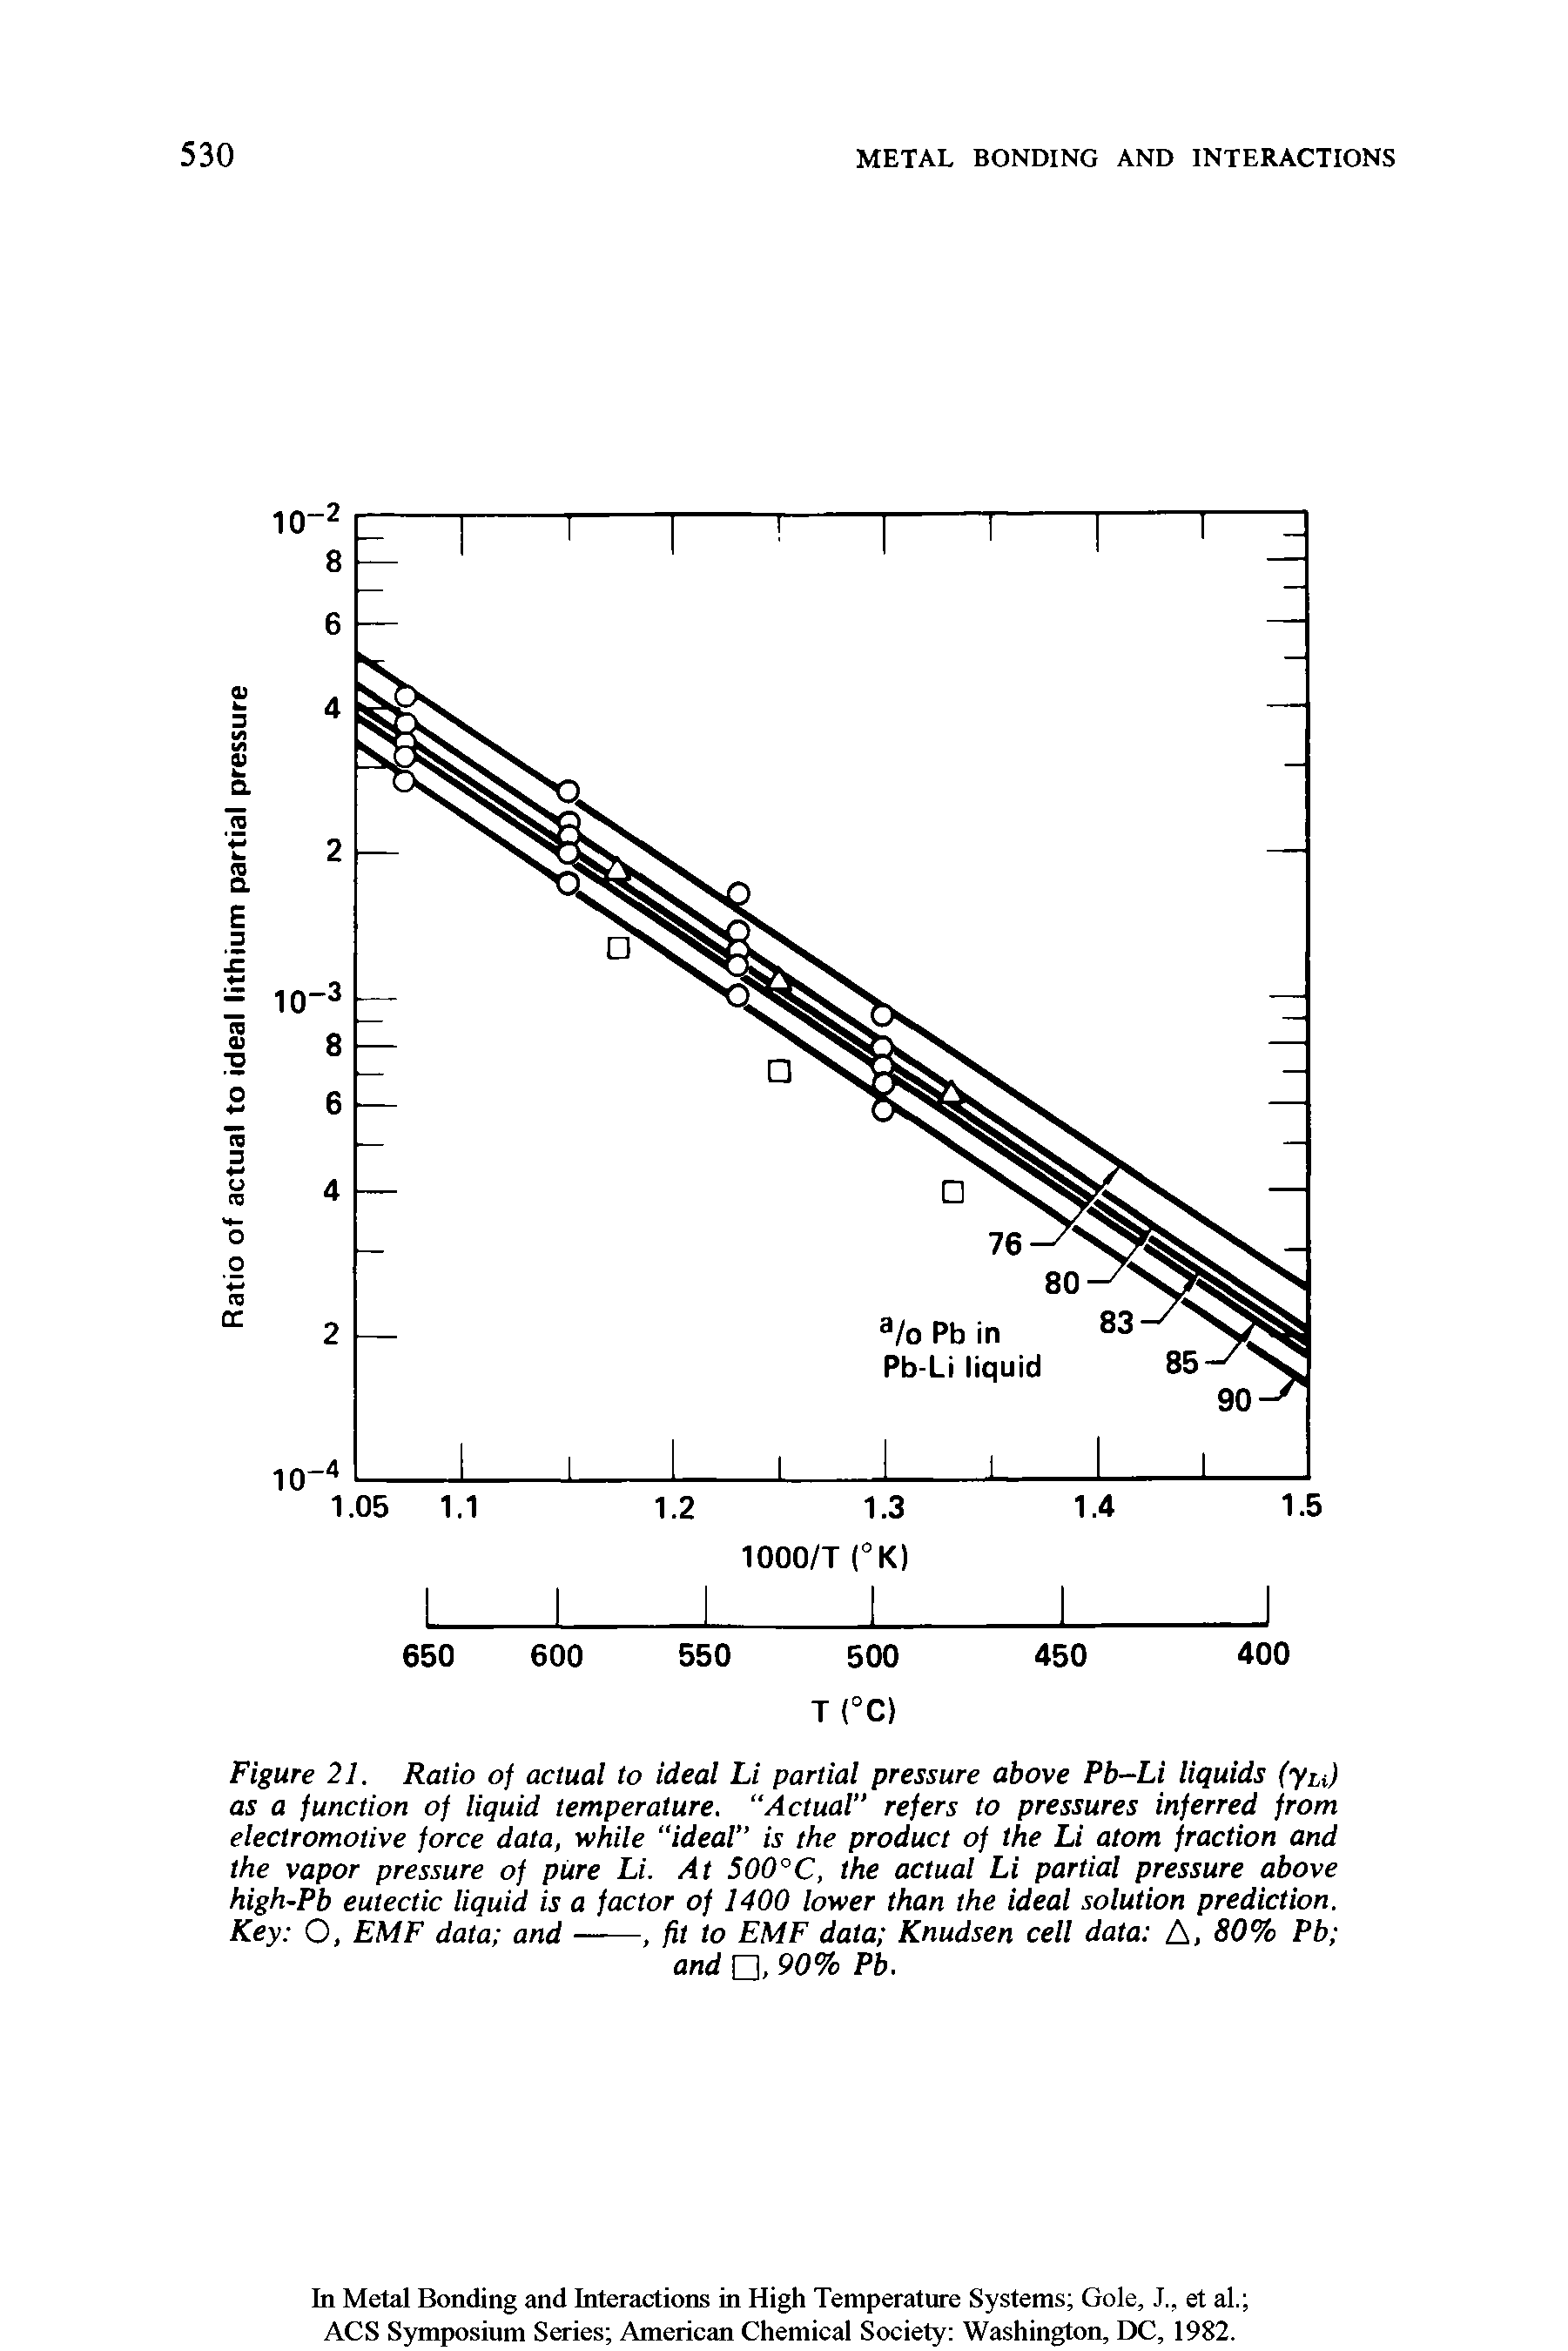 Figure 21. Ratio of actual to ideal Li partial pressure above Pb-Li liquids (yu) as a function of liquid temperature. Actual" refers to pressures inferred from electromotive force data, while ideal" is the product of the Li atom fraction and the vapor pressure of pure Li. At 500°C, the actual Li partial pressure above high-Pb eutectic liquid is a factor of 1400 lower than the ideal solution prediction. Key O, EMF data and ——, fit to EMF data Knudsen cell data [s, 80% Pb ...